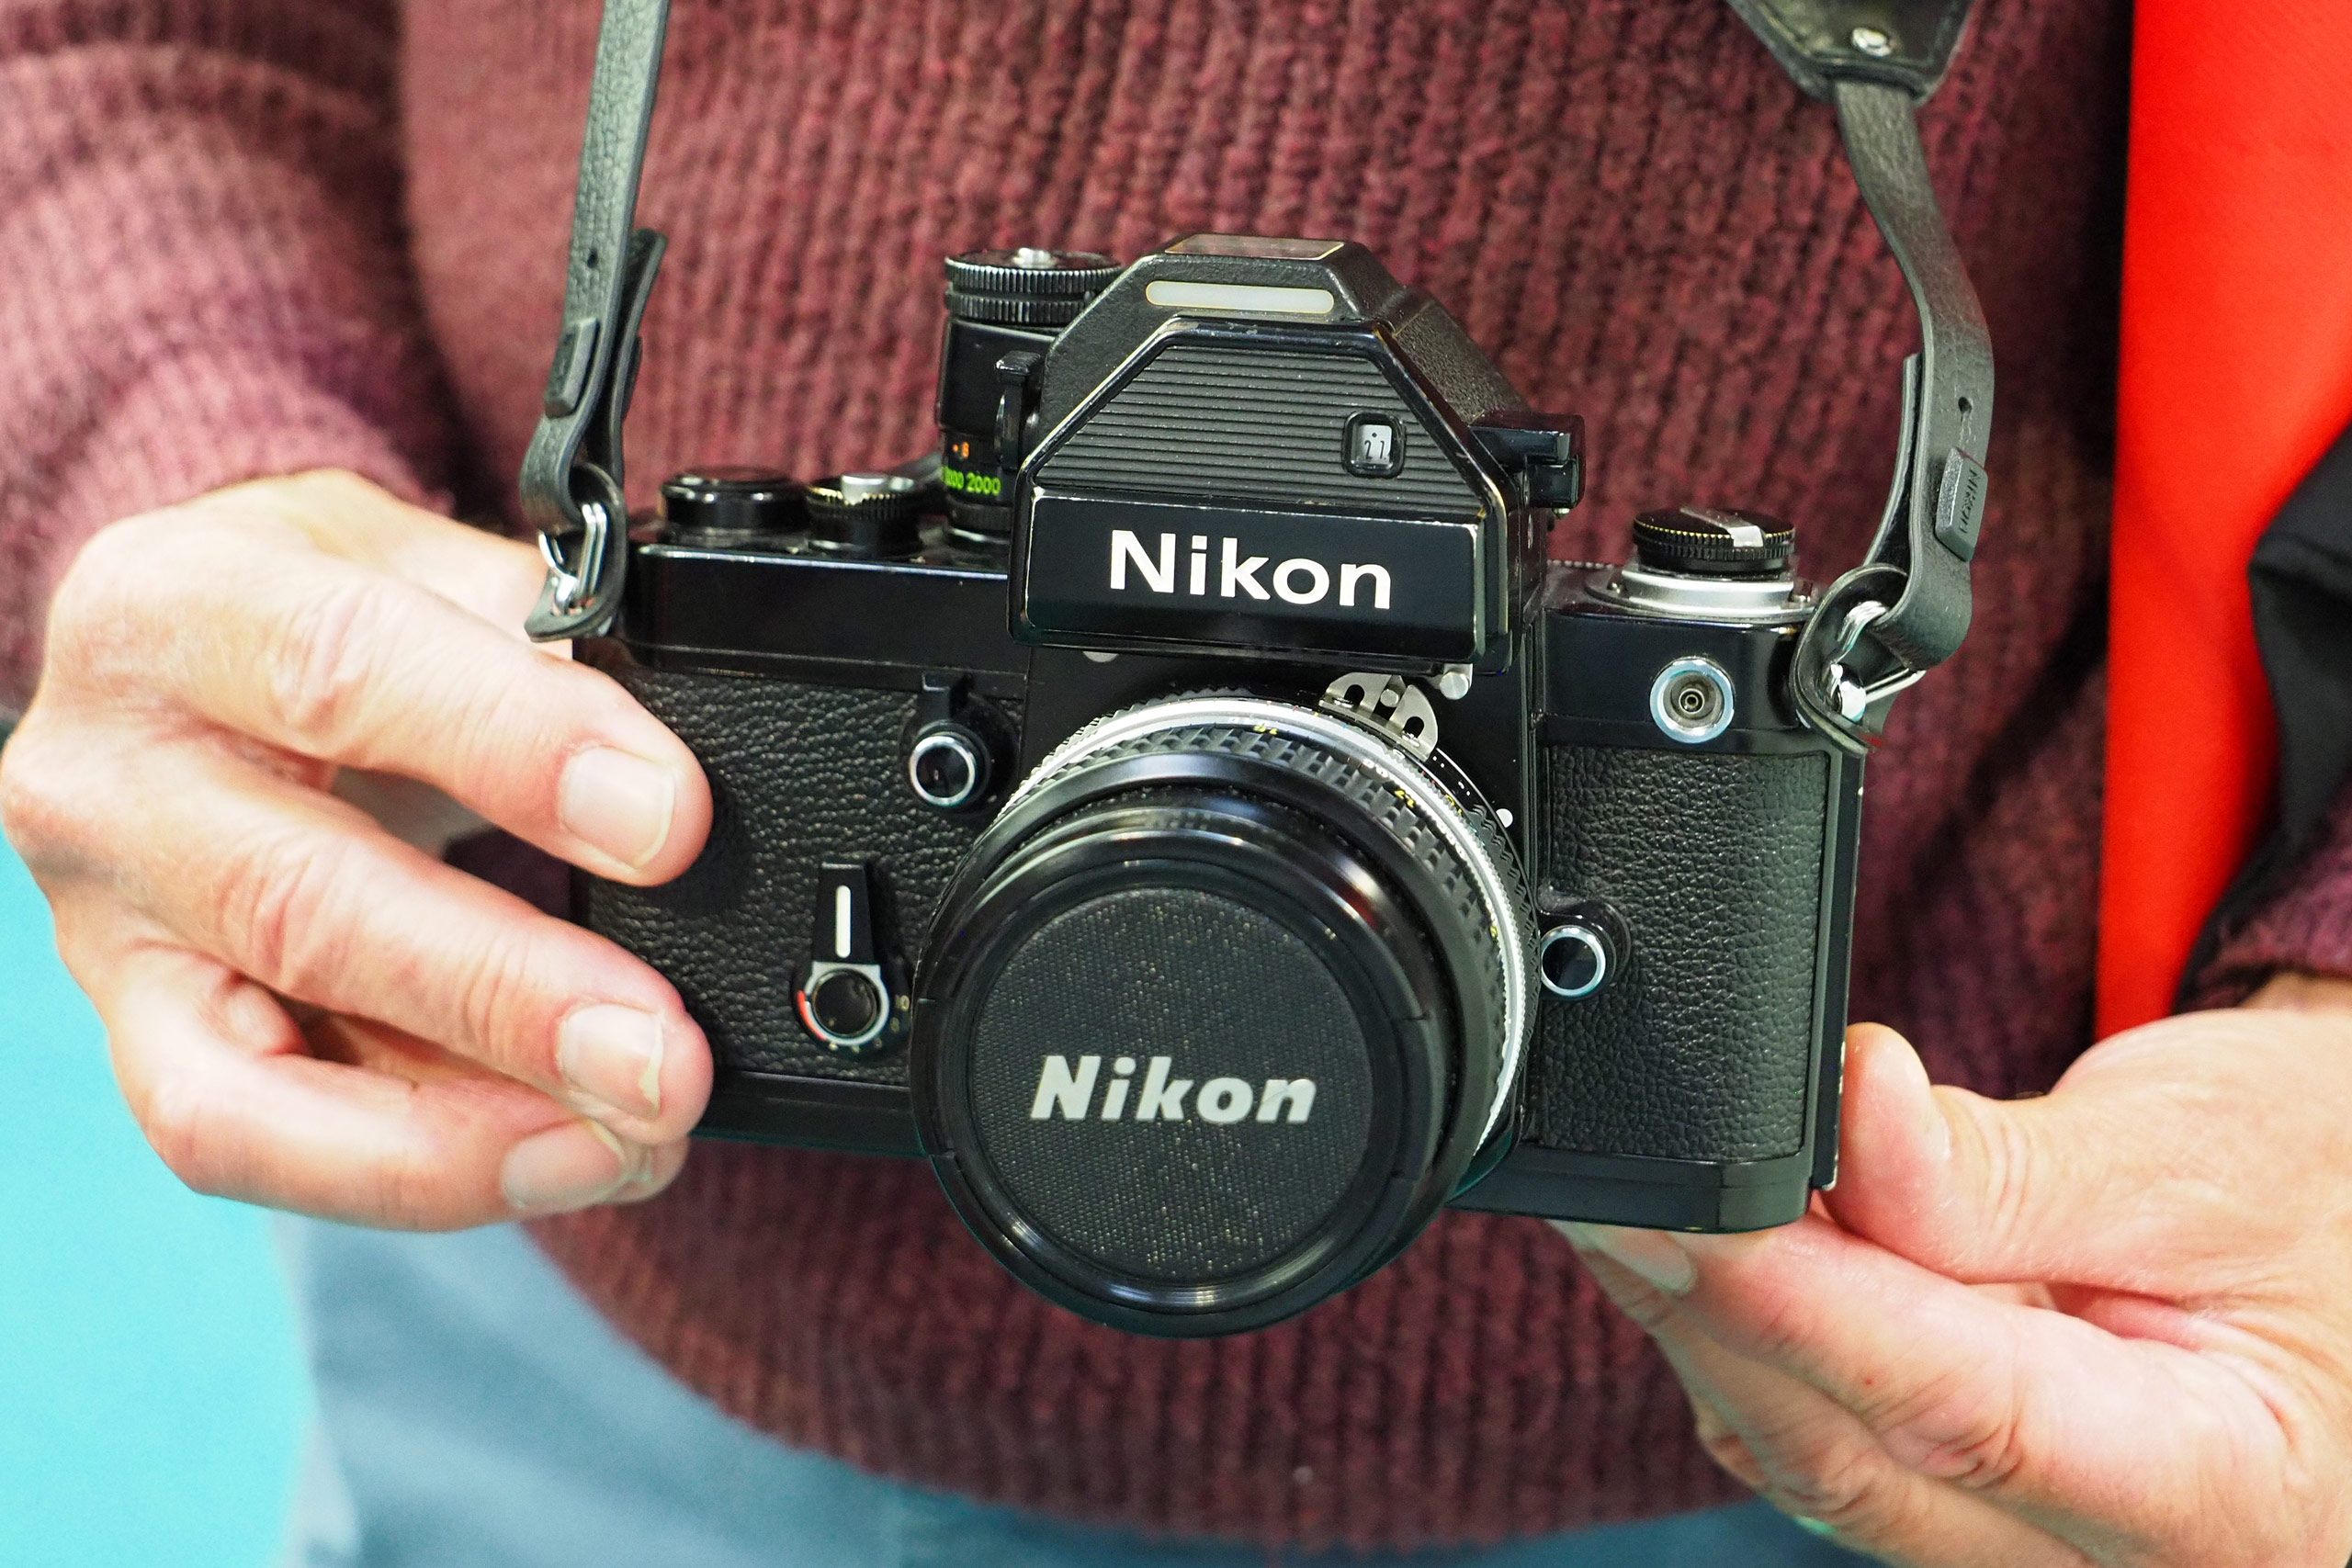 The Nikon F2S, a rare 35mm film SLR camera, was being used by a visitor to TPS 2022